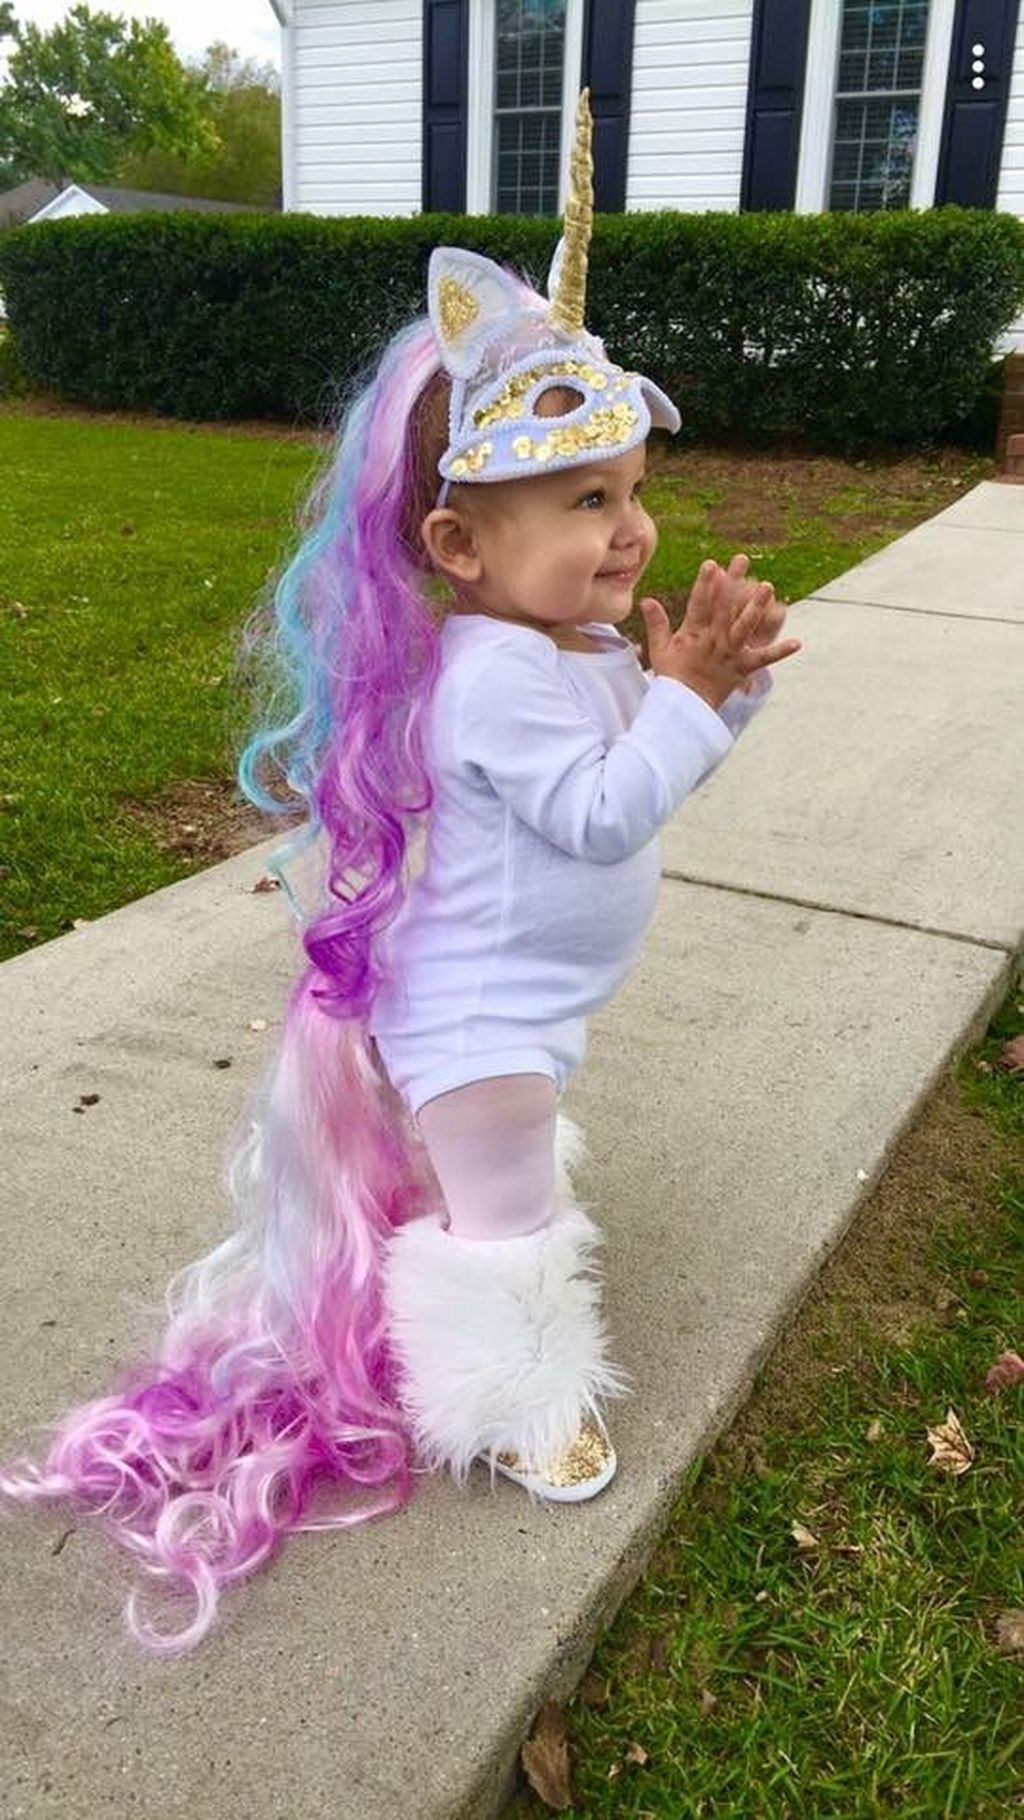 DIY Toddler Unicorn Costume
 Pin by Andasia Feazell on 2018 Halloween costumes